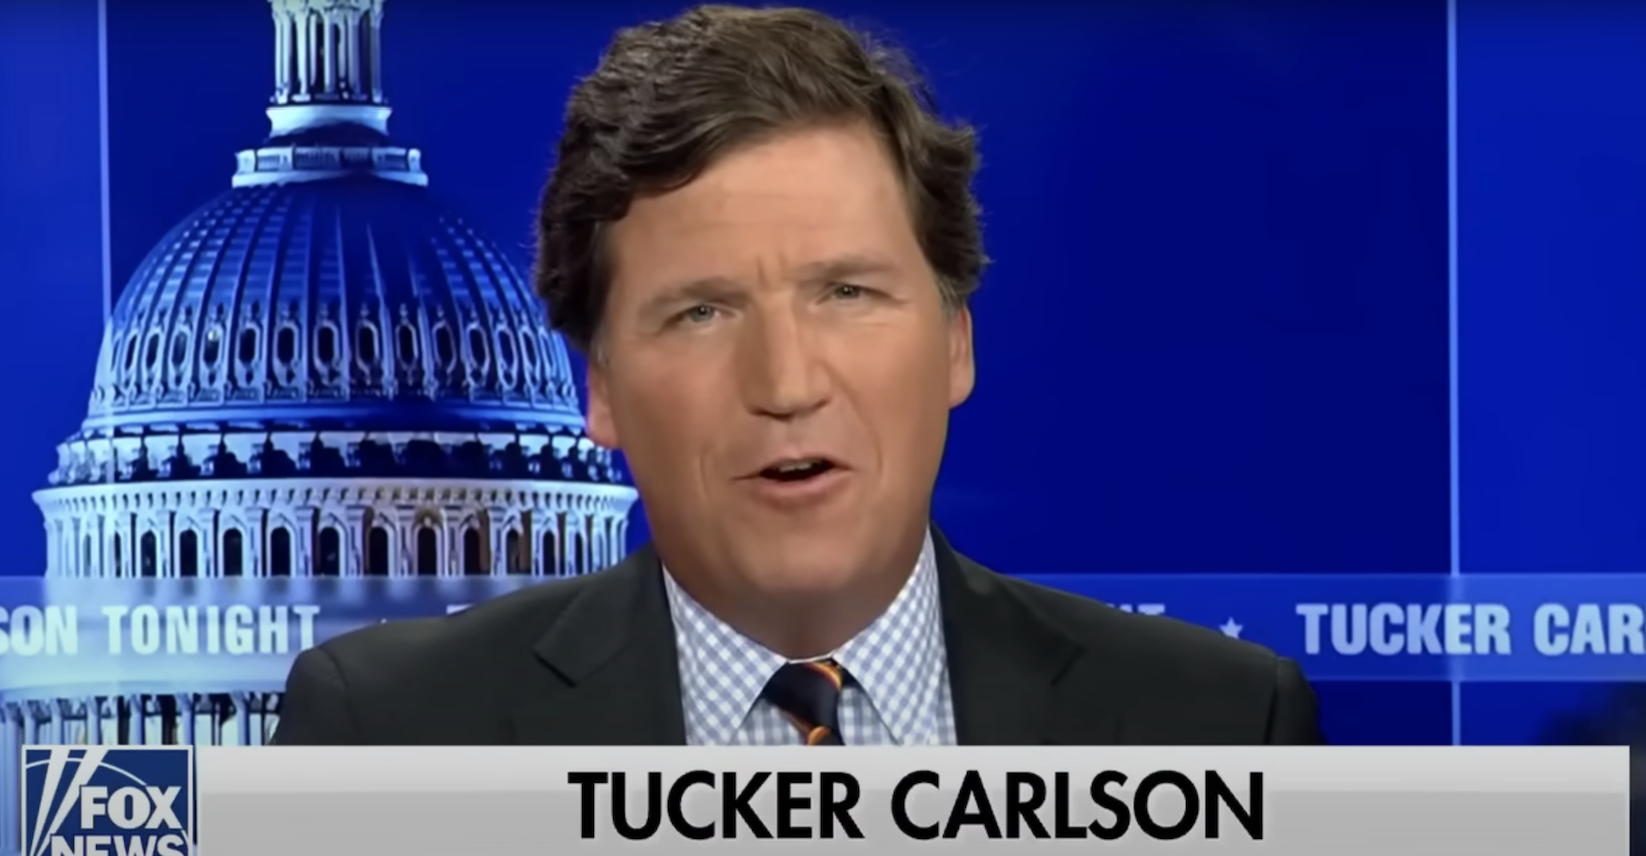 We Wouldn’t Need Tucker Carlson If The Jan. 6 Committee Hadn’t Put On A Partisan Show Trial